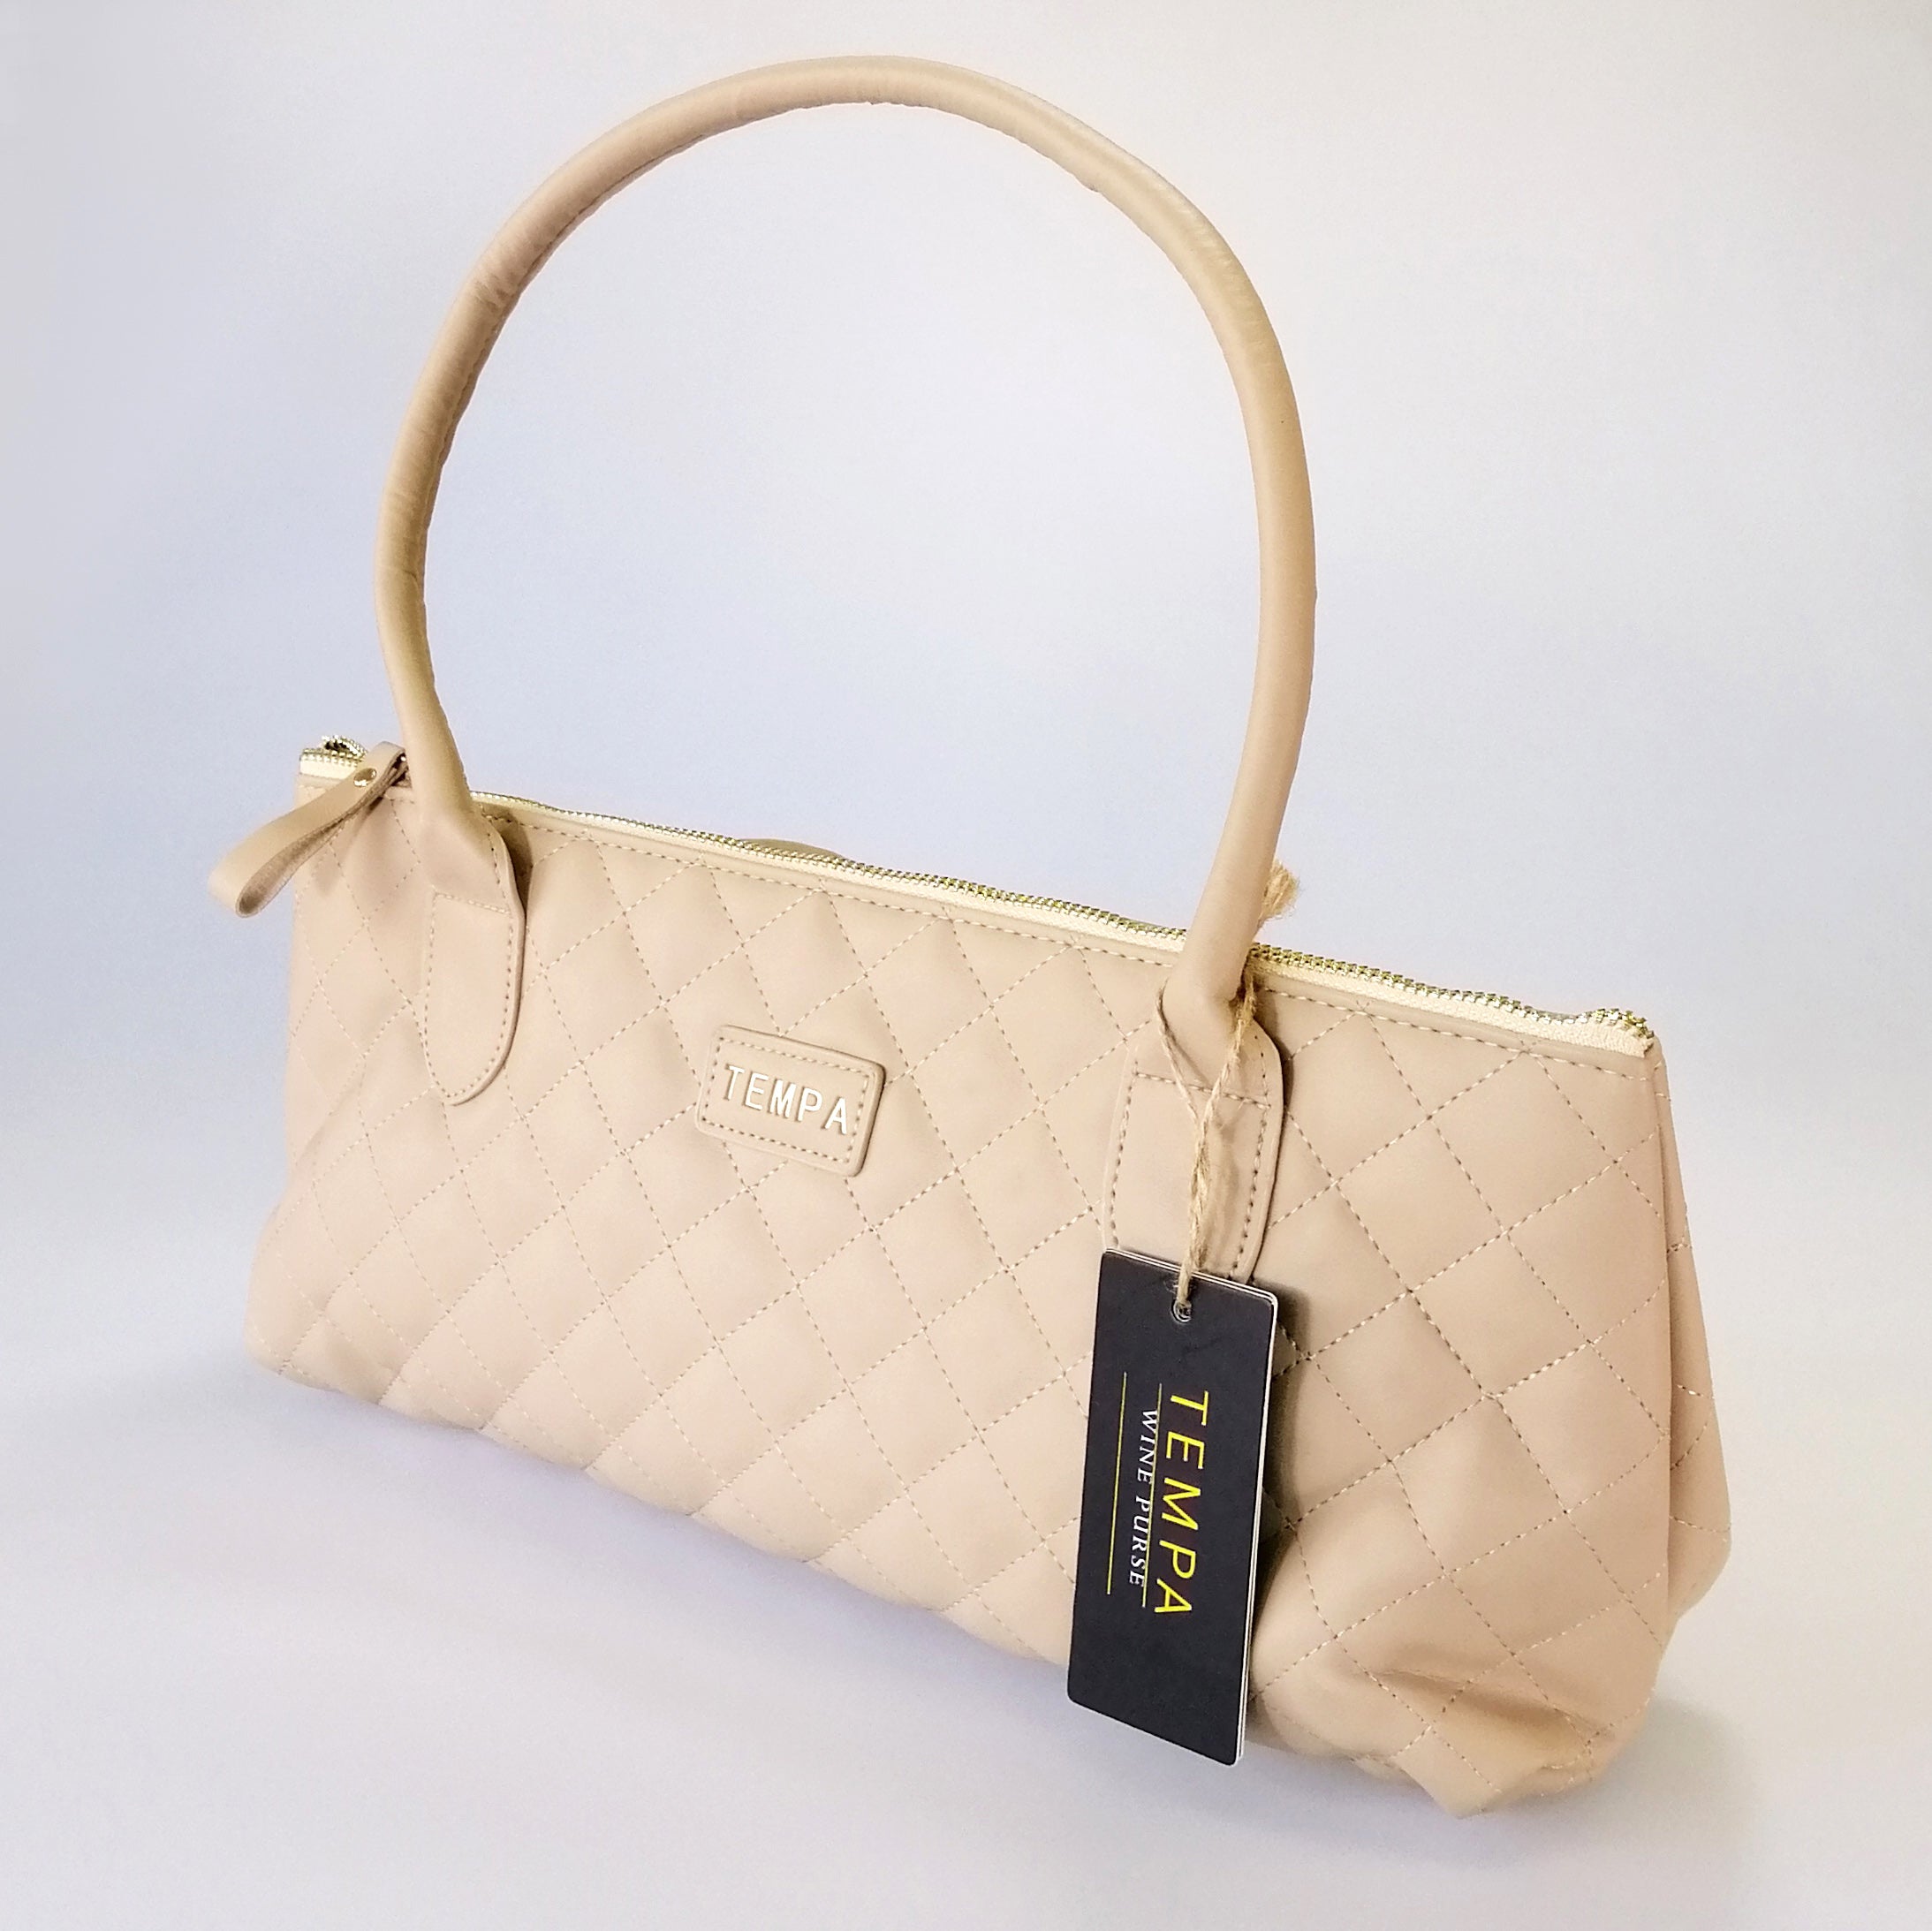 Tempa - Insulated Wine Purse - Quilted Latte